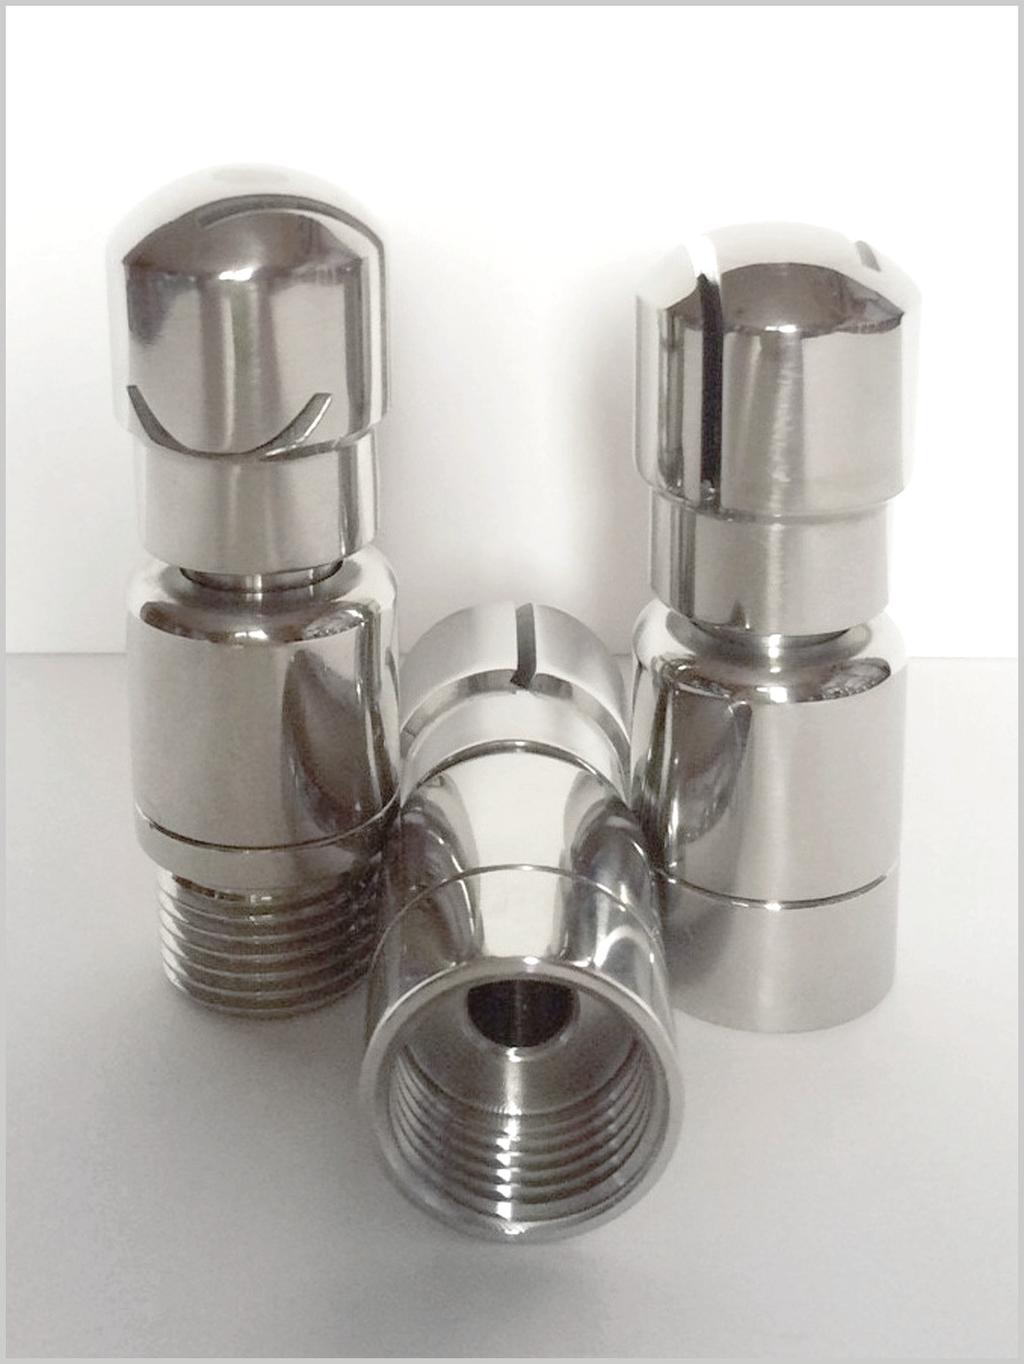 Rotary head series 24 Construction: The rotary spray heads are made of AISI316L stainless steel and are mounted onto two bearings.